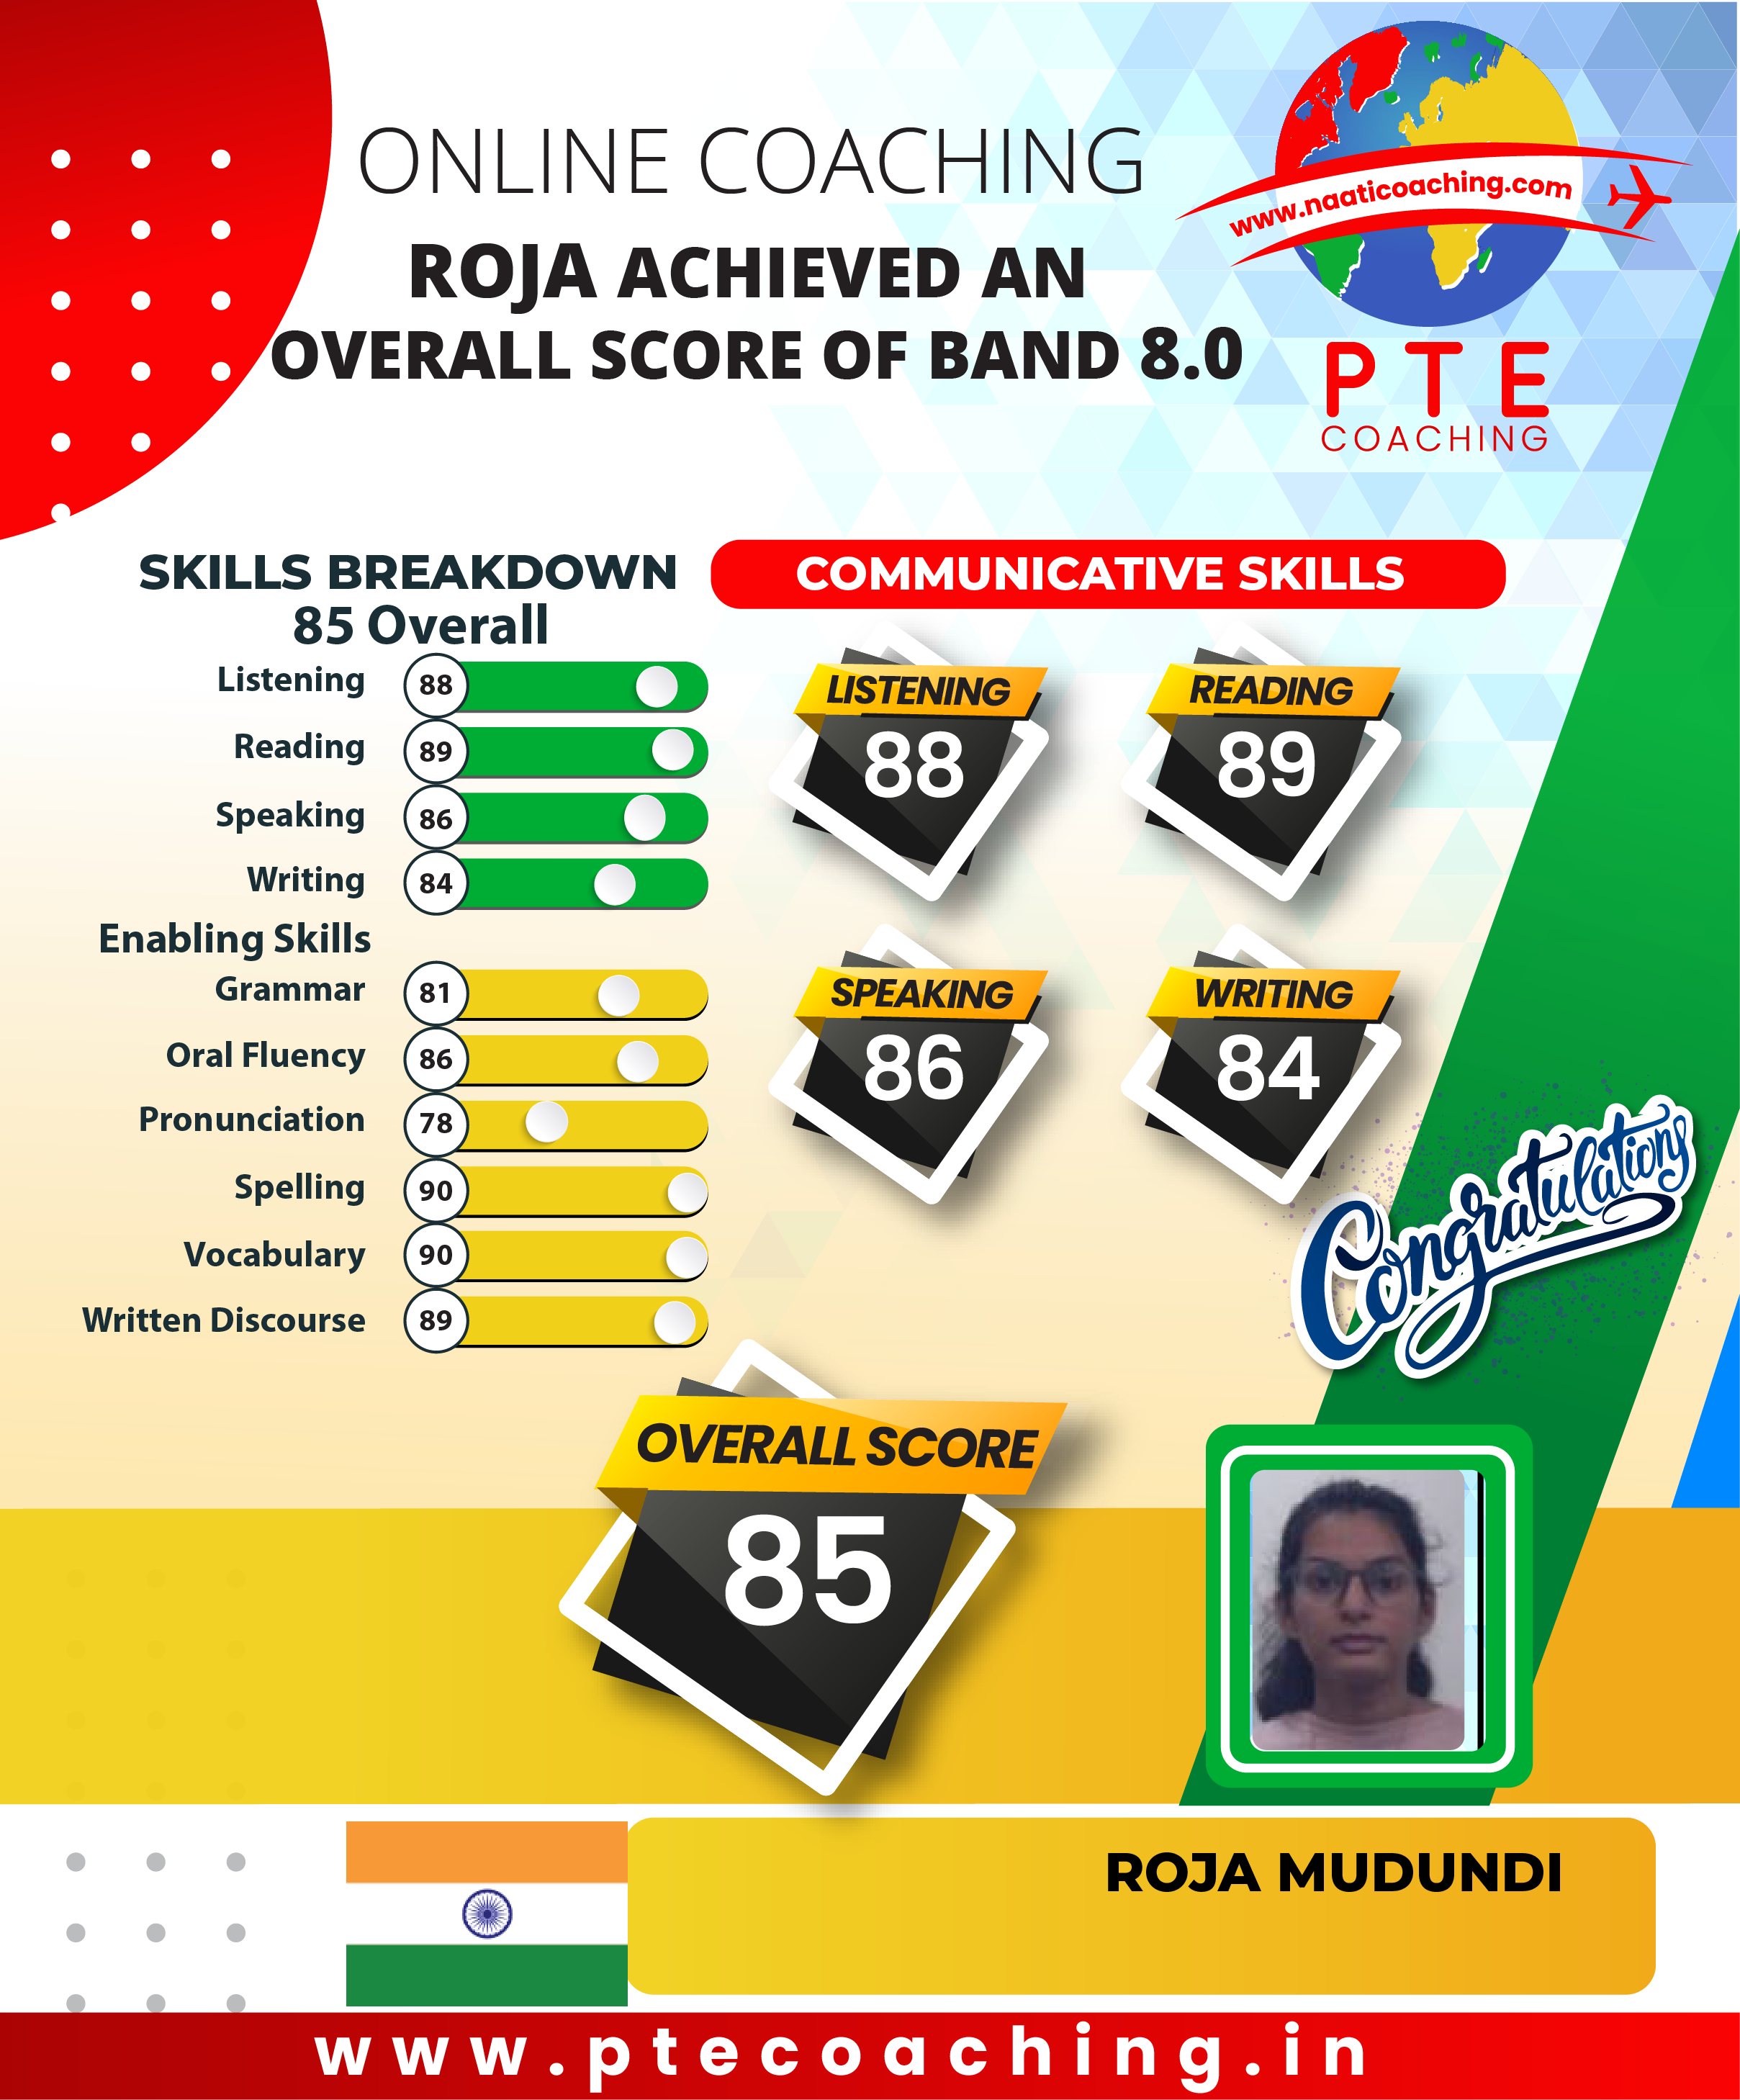 PTE Coaching Scorecard - Roja achieved an overall score of band 8.0